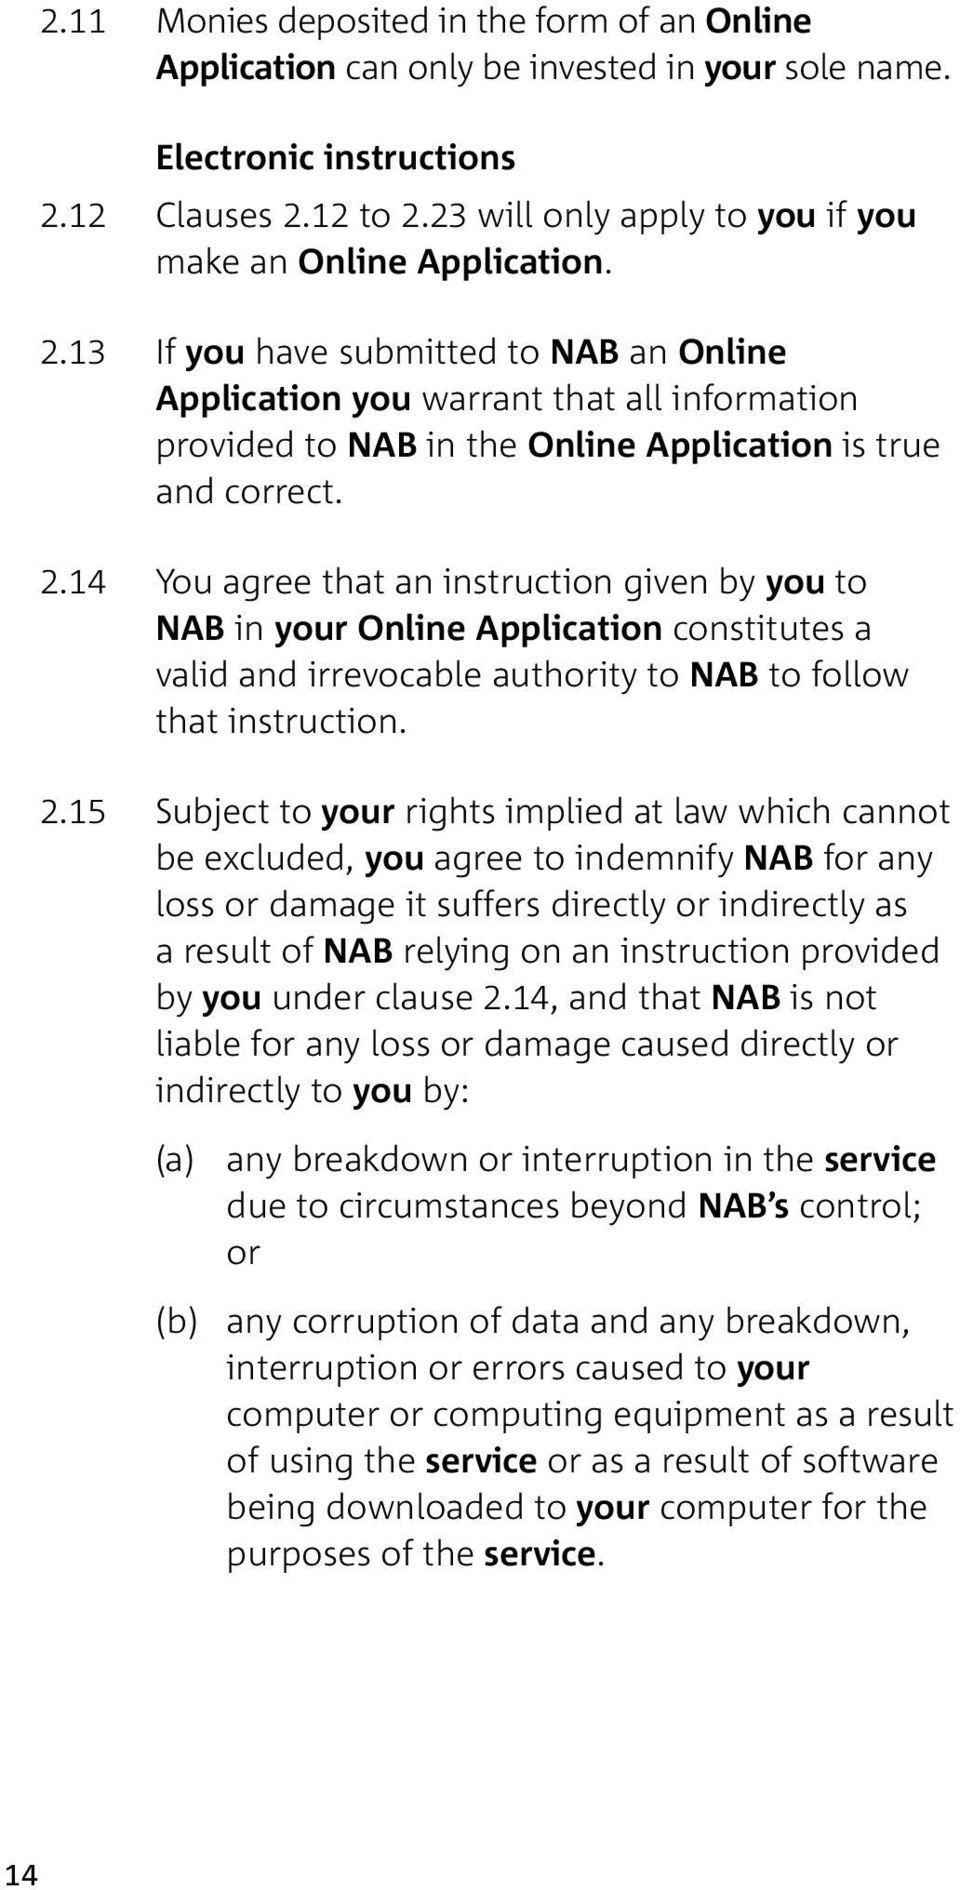 13 If you have submitted to NAB an Online Application you warrant that all information provided to NAB in the Online Application is true and correct. 2.